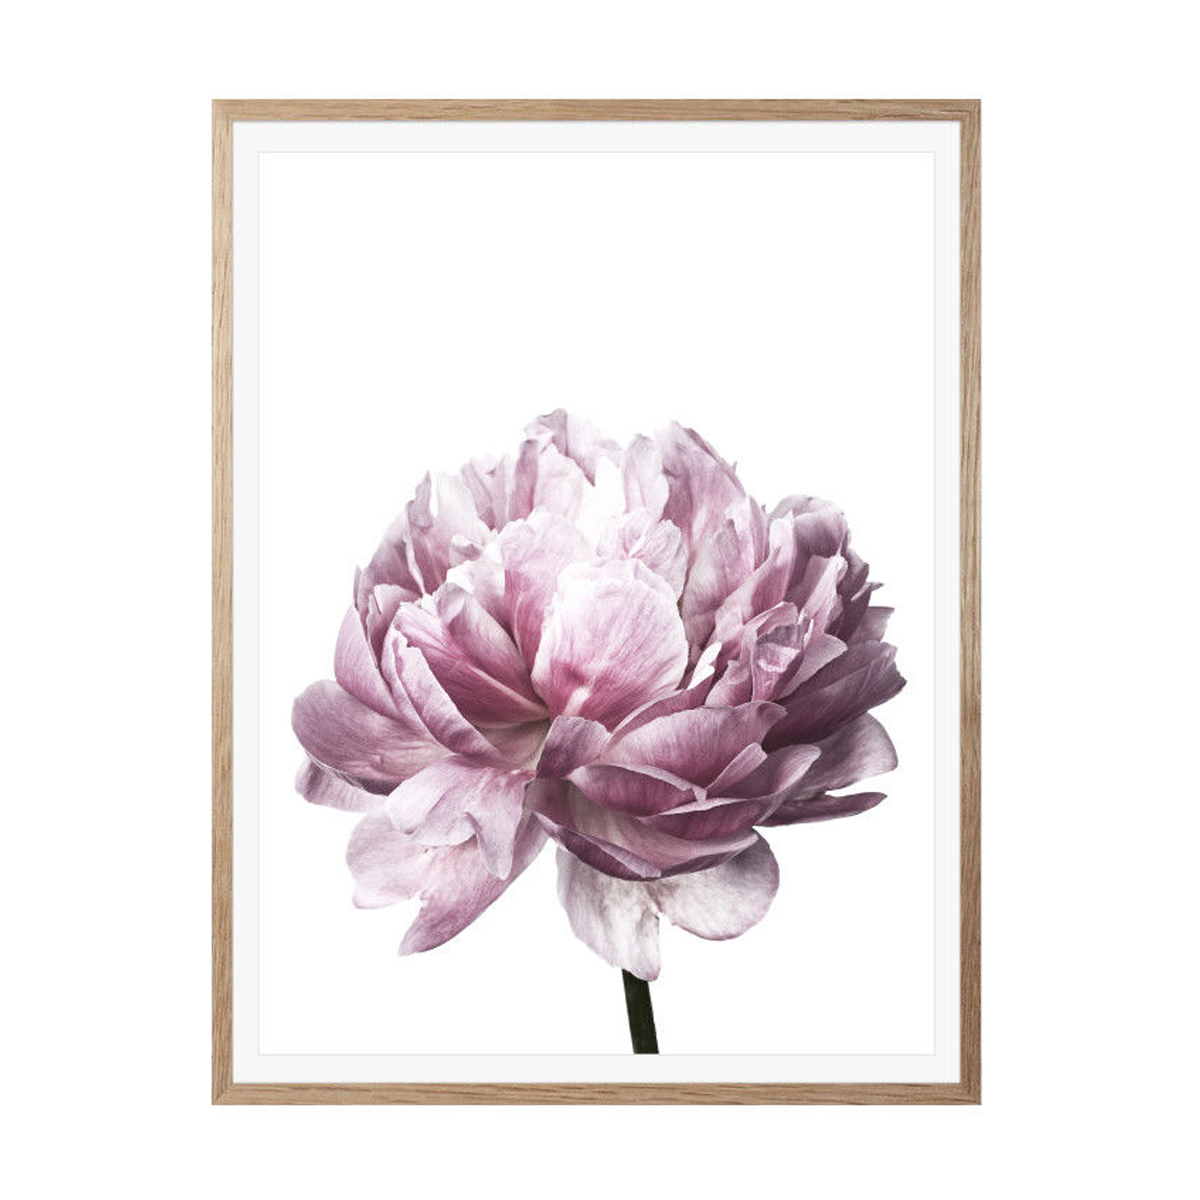 20x3030x40cm-Flower-Modern-Wall-Art-Canvas-Paintings-Picture-Home-Decor-Mural-Poster-with-Frame-1632681-6